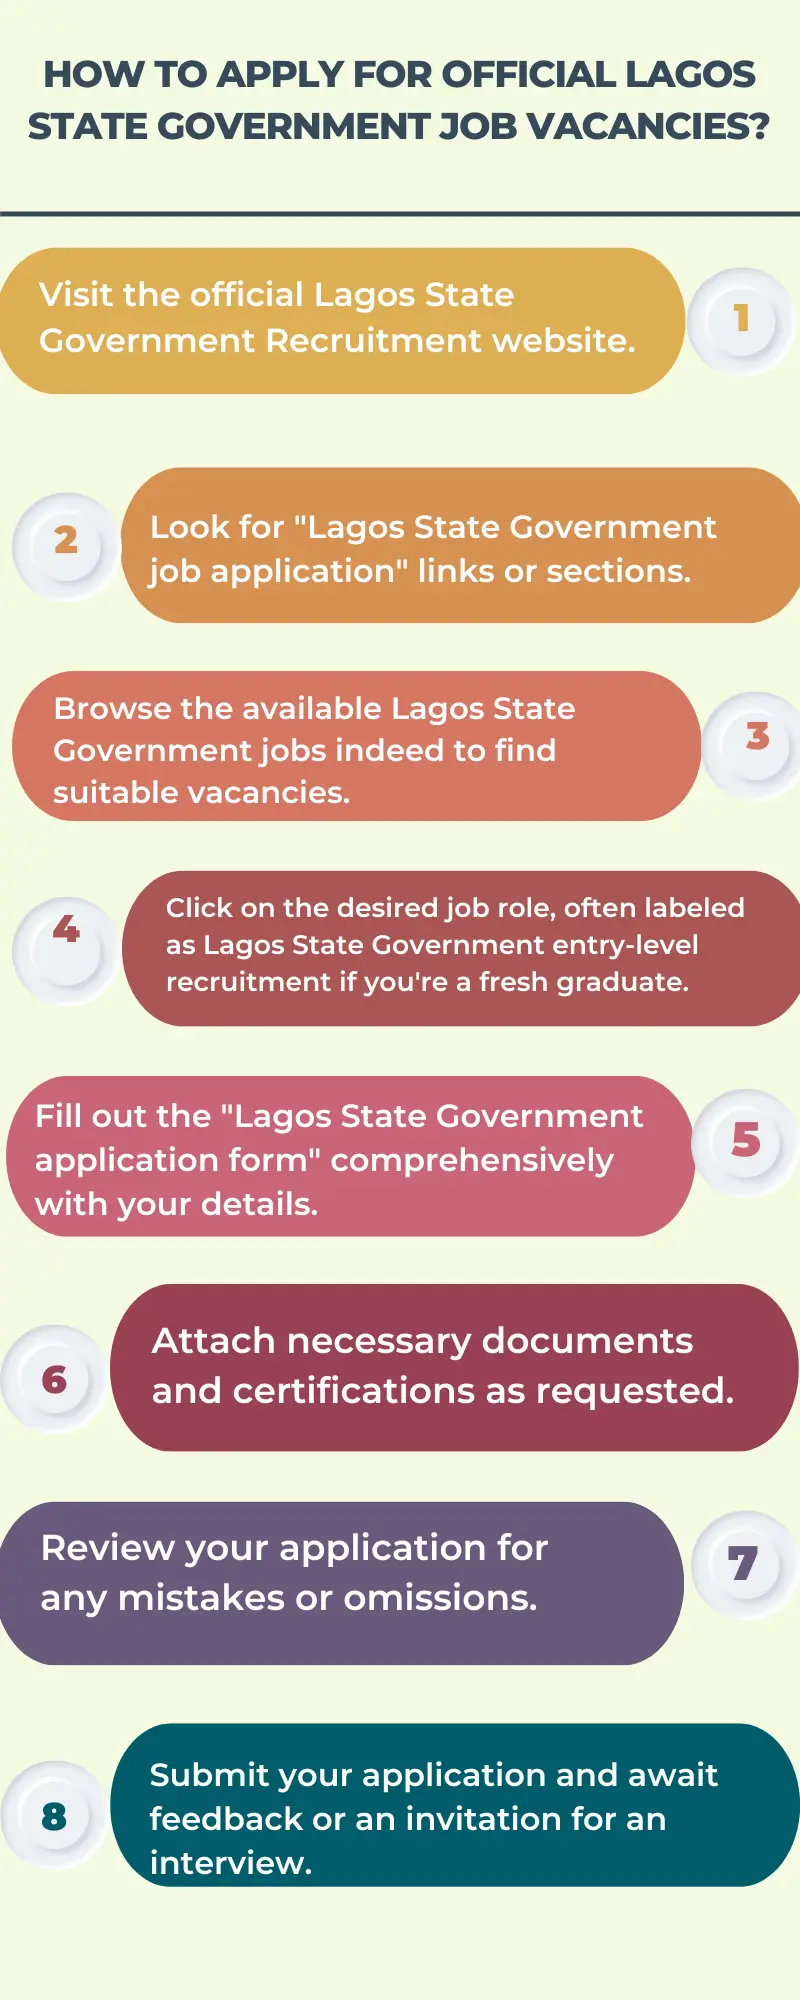 How to Apply for Official Lagos State Government Job Vacancies?